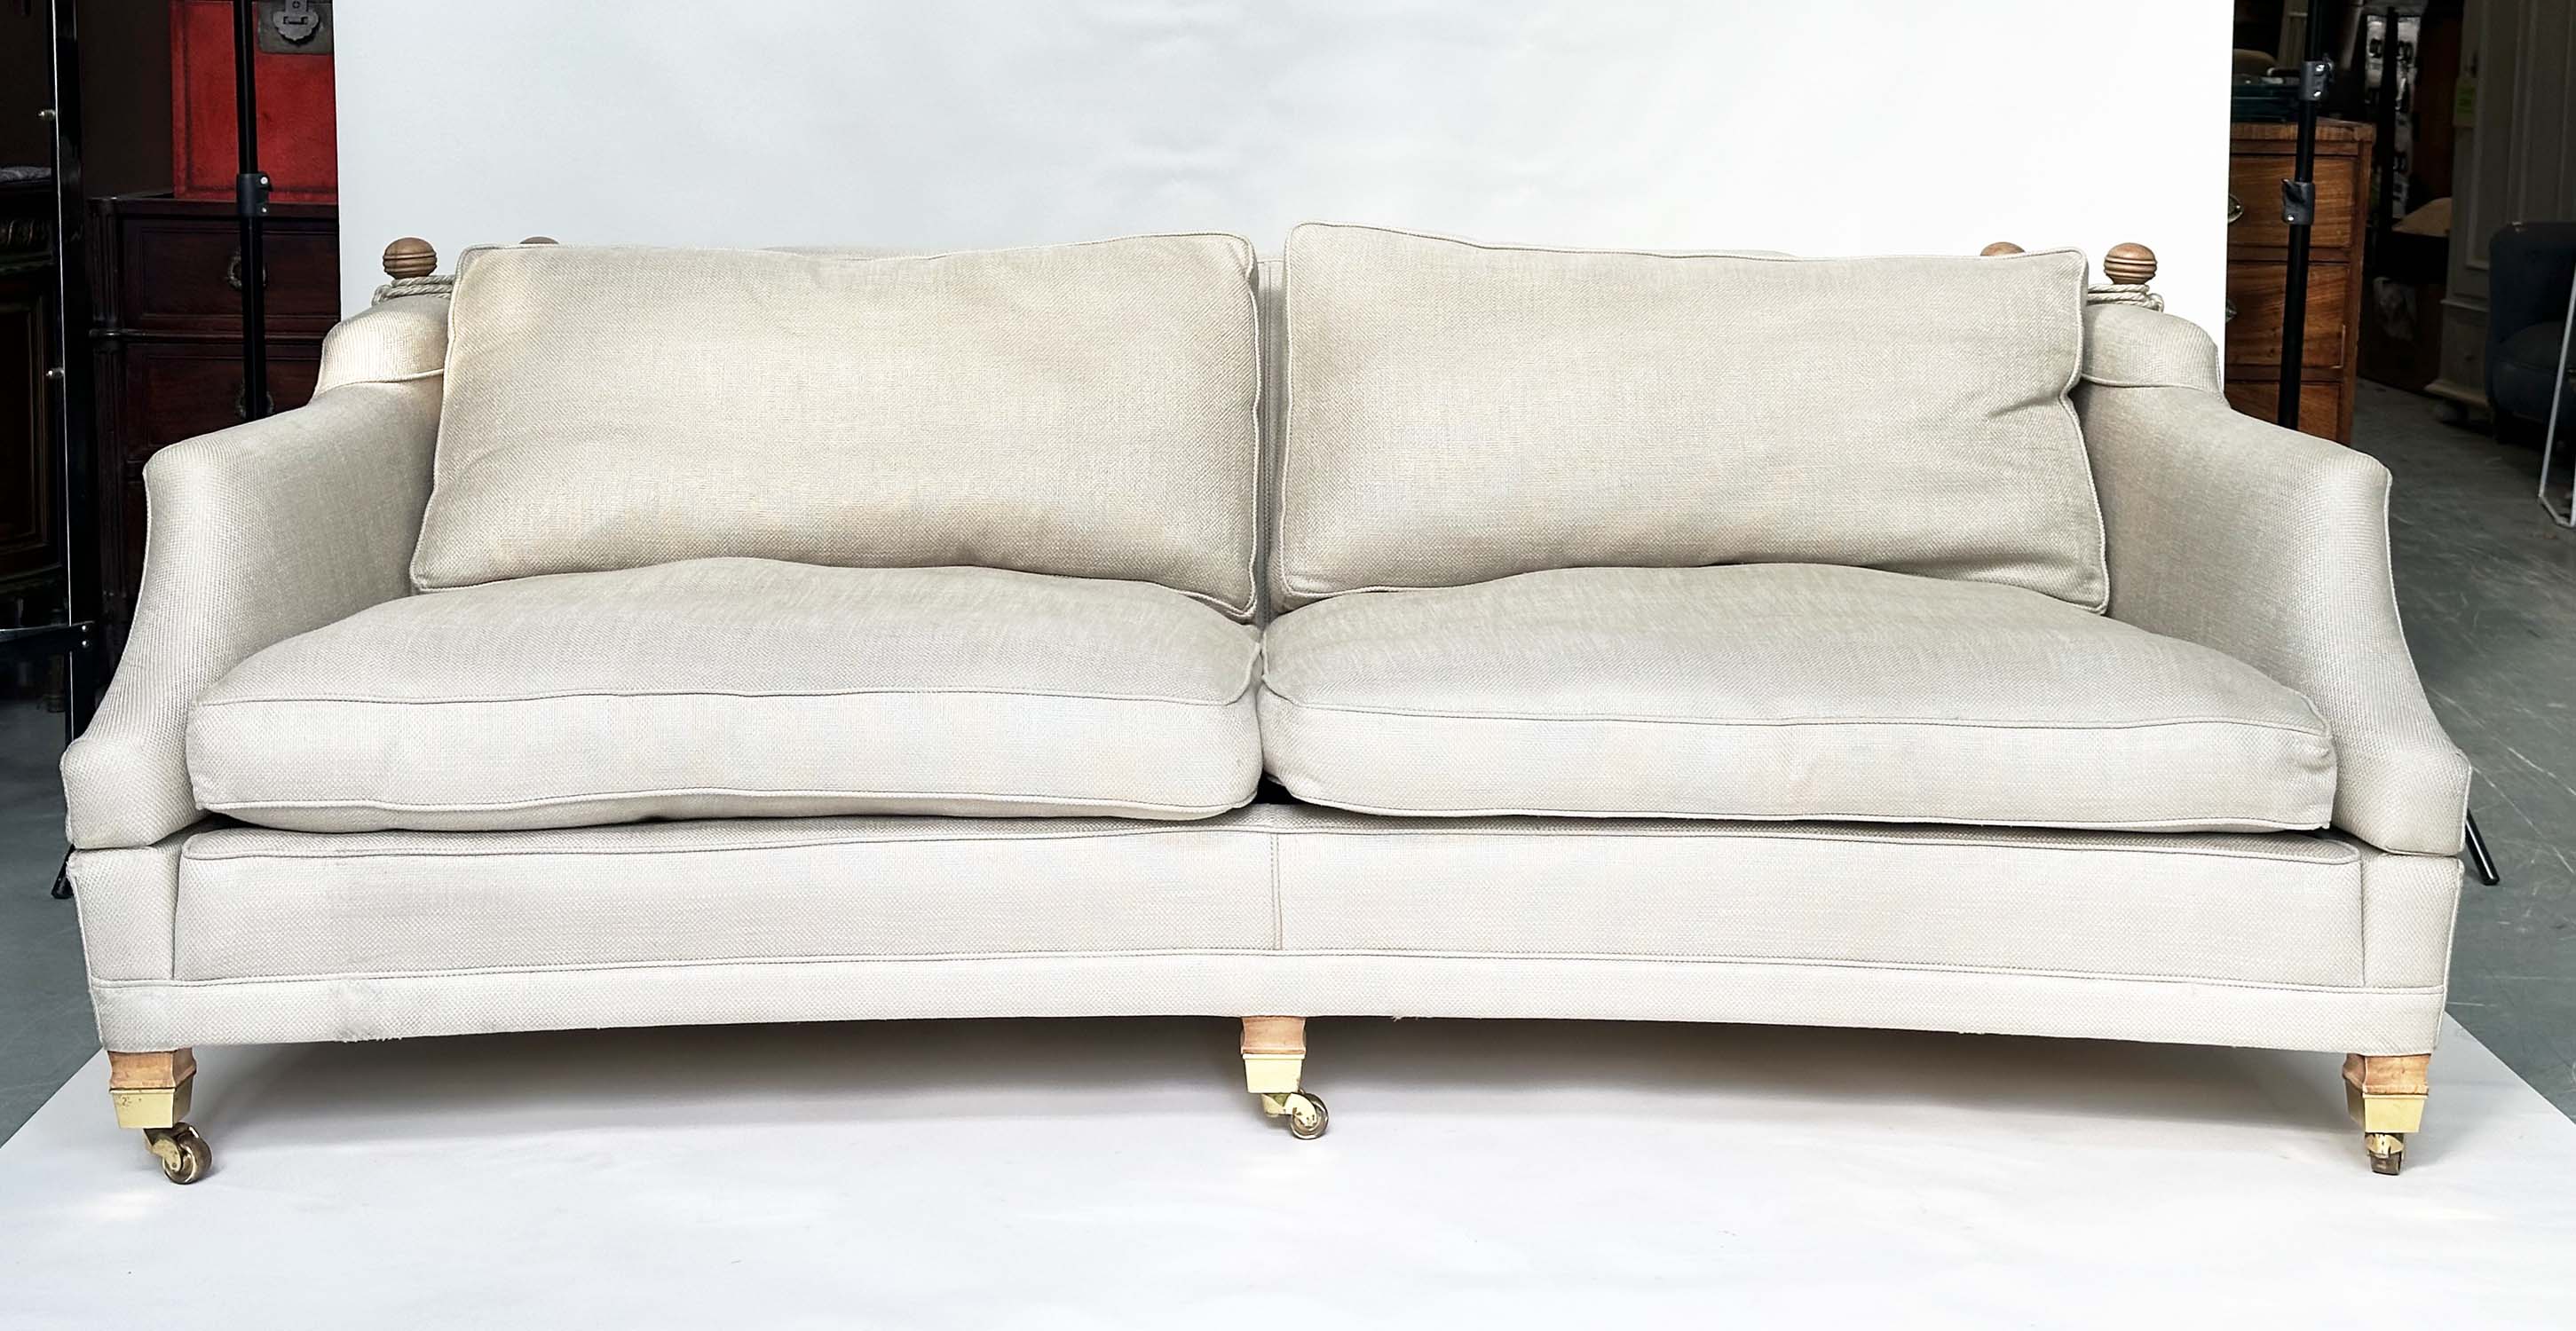 KNOLL SOFA BY DURESTA, grey linen upholstered with down swept arms, feather filled cushions and - Bild 14 aus 14